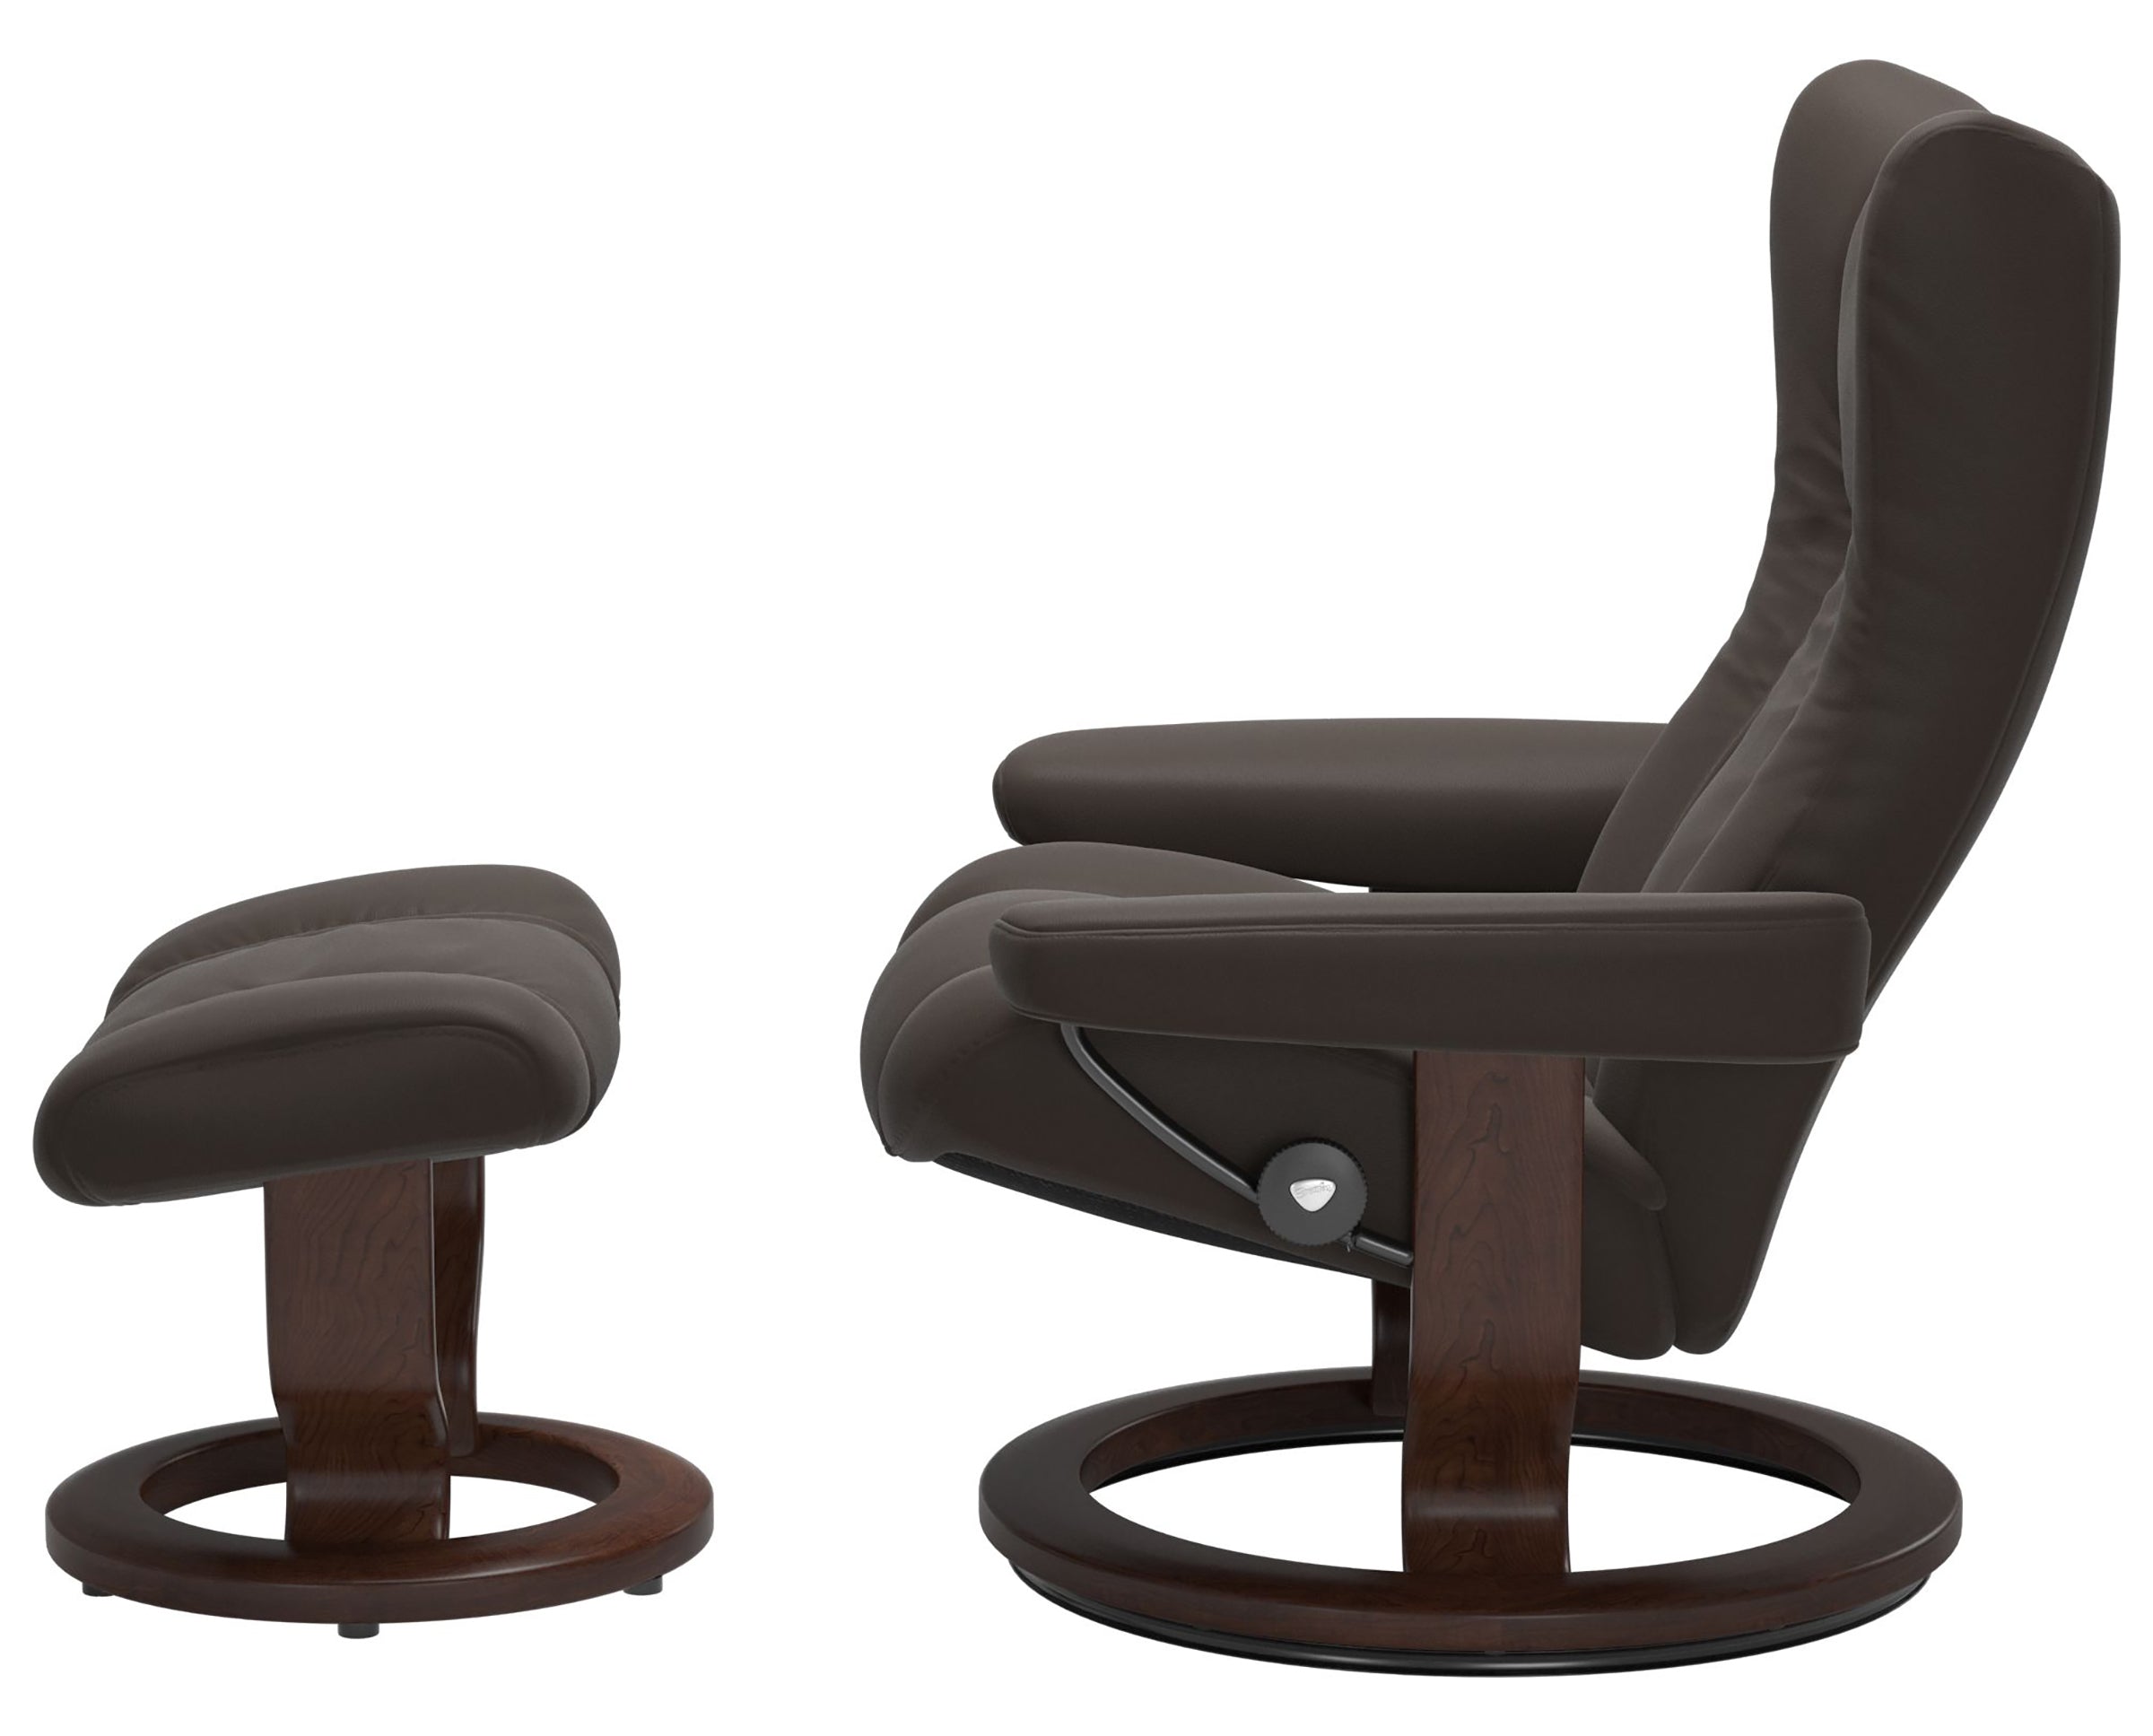 Paloma Leather Chestnut S &amp; Brown Base | Stressless Wing Classic Recliner | Valley Ridge Furniture